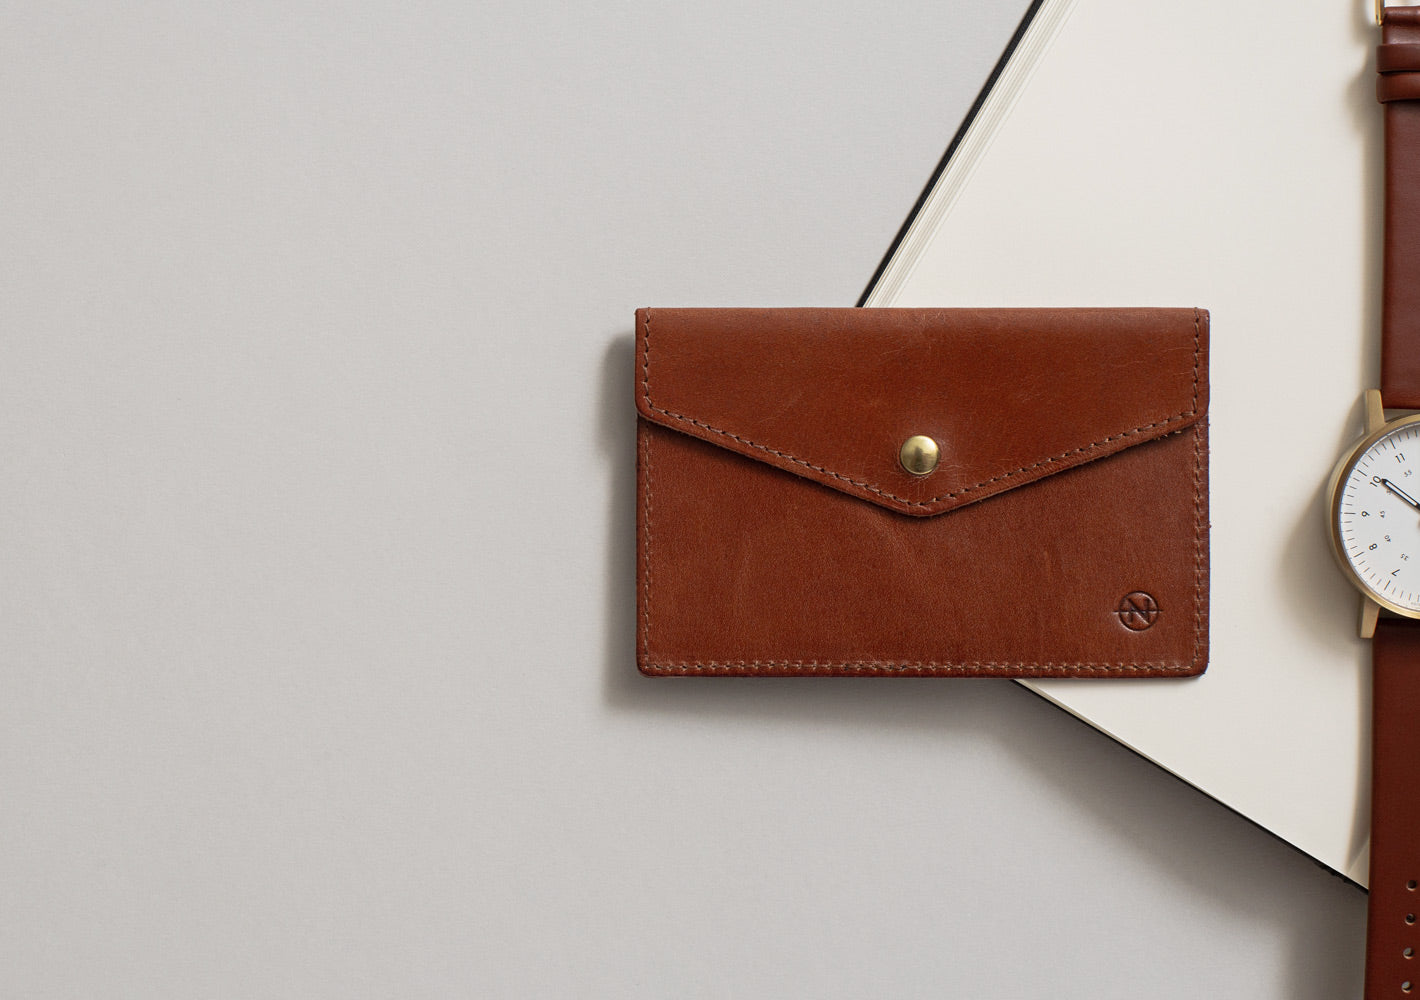 The Cognac Nimrodian Card Case from VOID Watches, designed by David Ericsson.